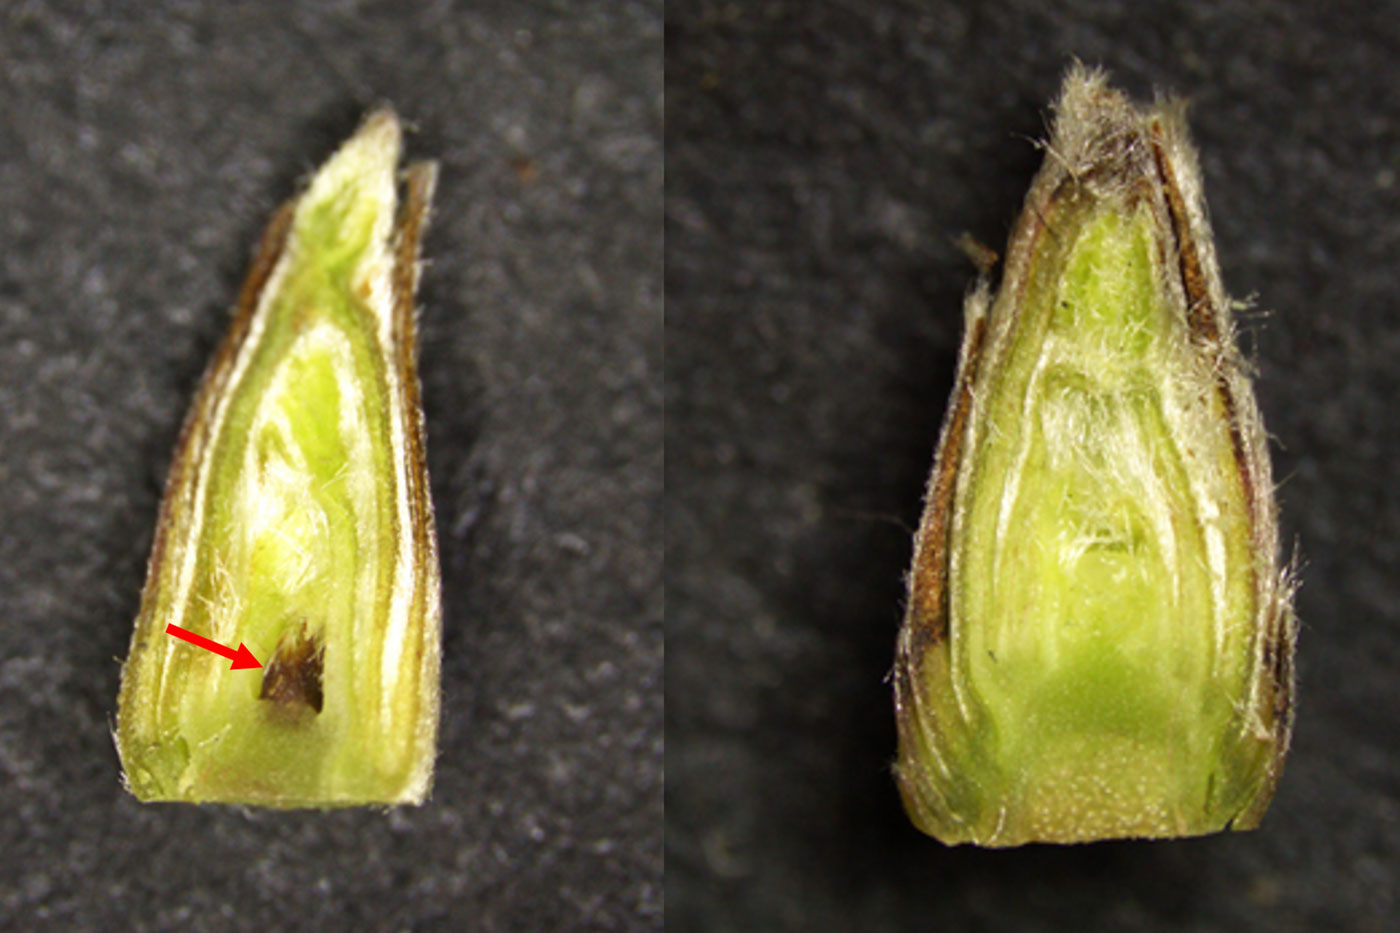 cross-section of 2 buds with red arrow pointing to small dark spot on bud on left